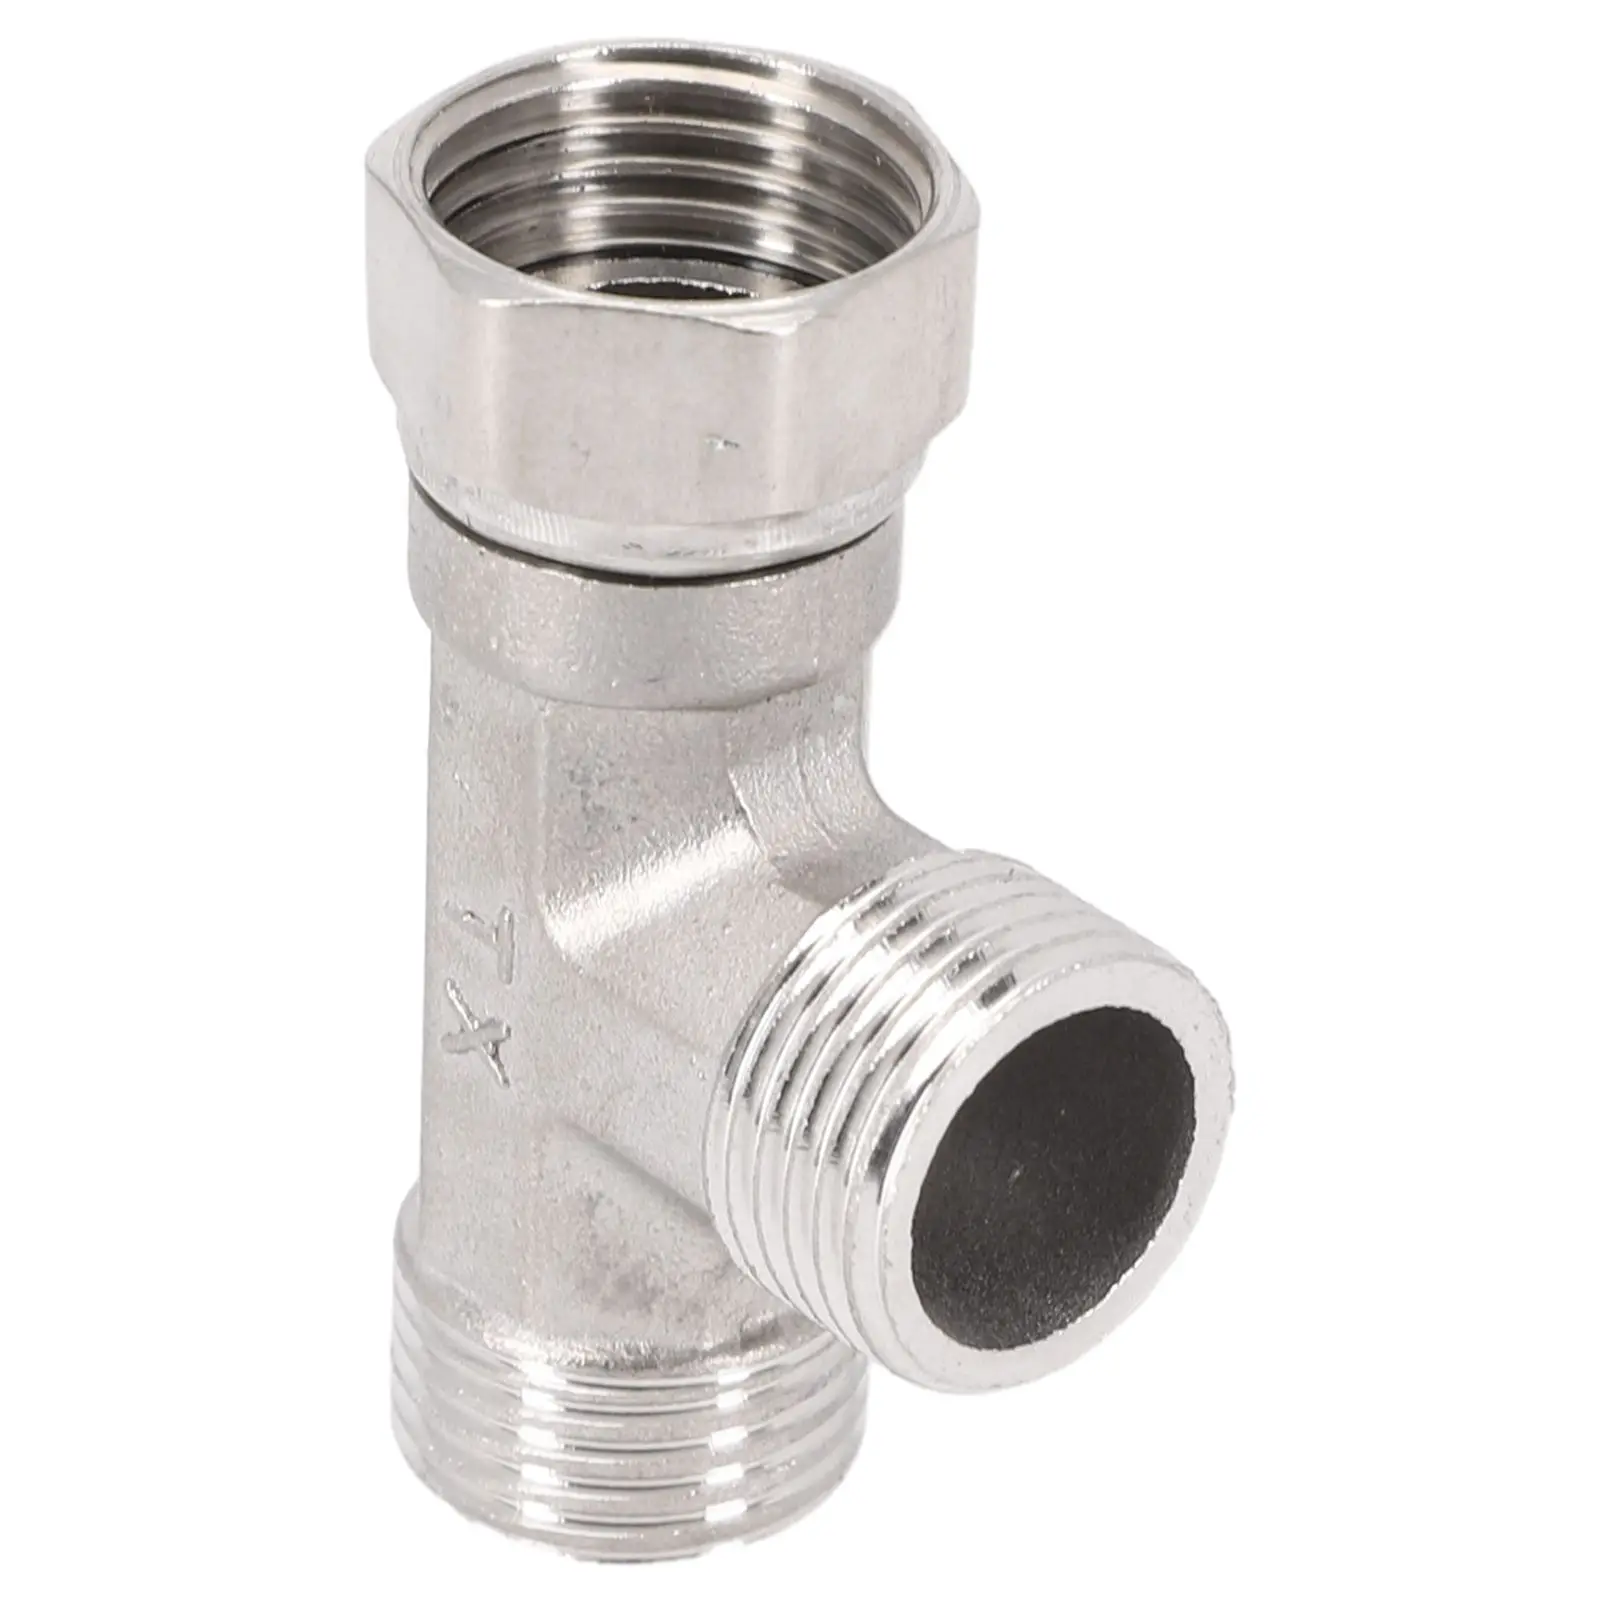 

Ideal T Adapter 3 Ways Valve for Bathroom Toilet Durable Stainless Steel Premium Safety Features Enjoy High Water Pressure